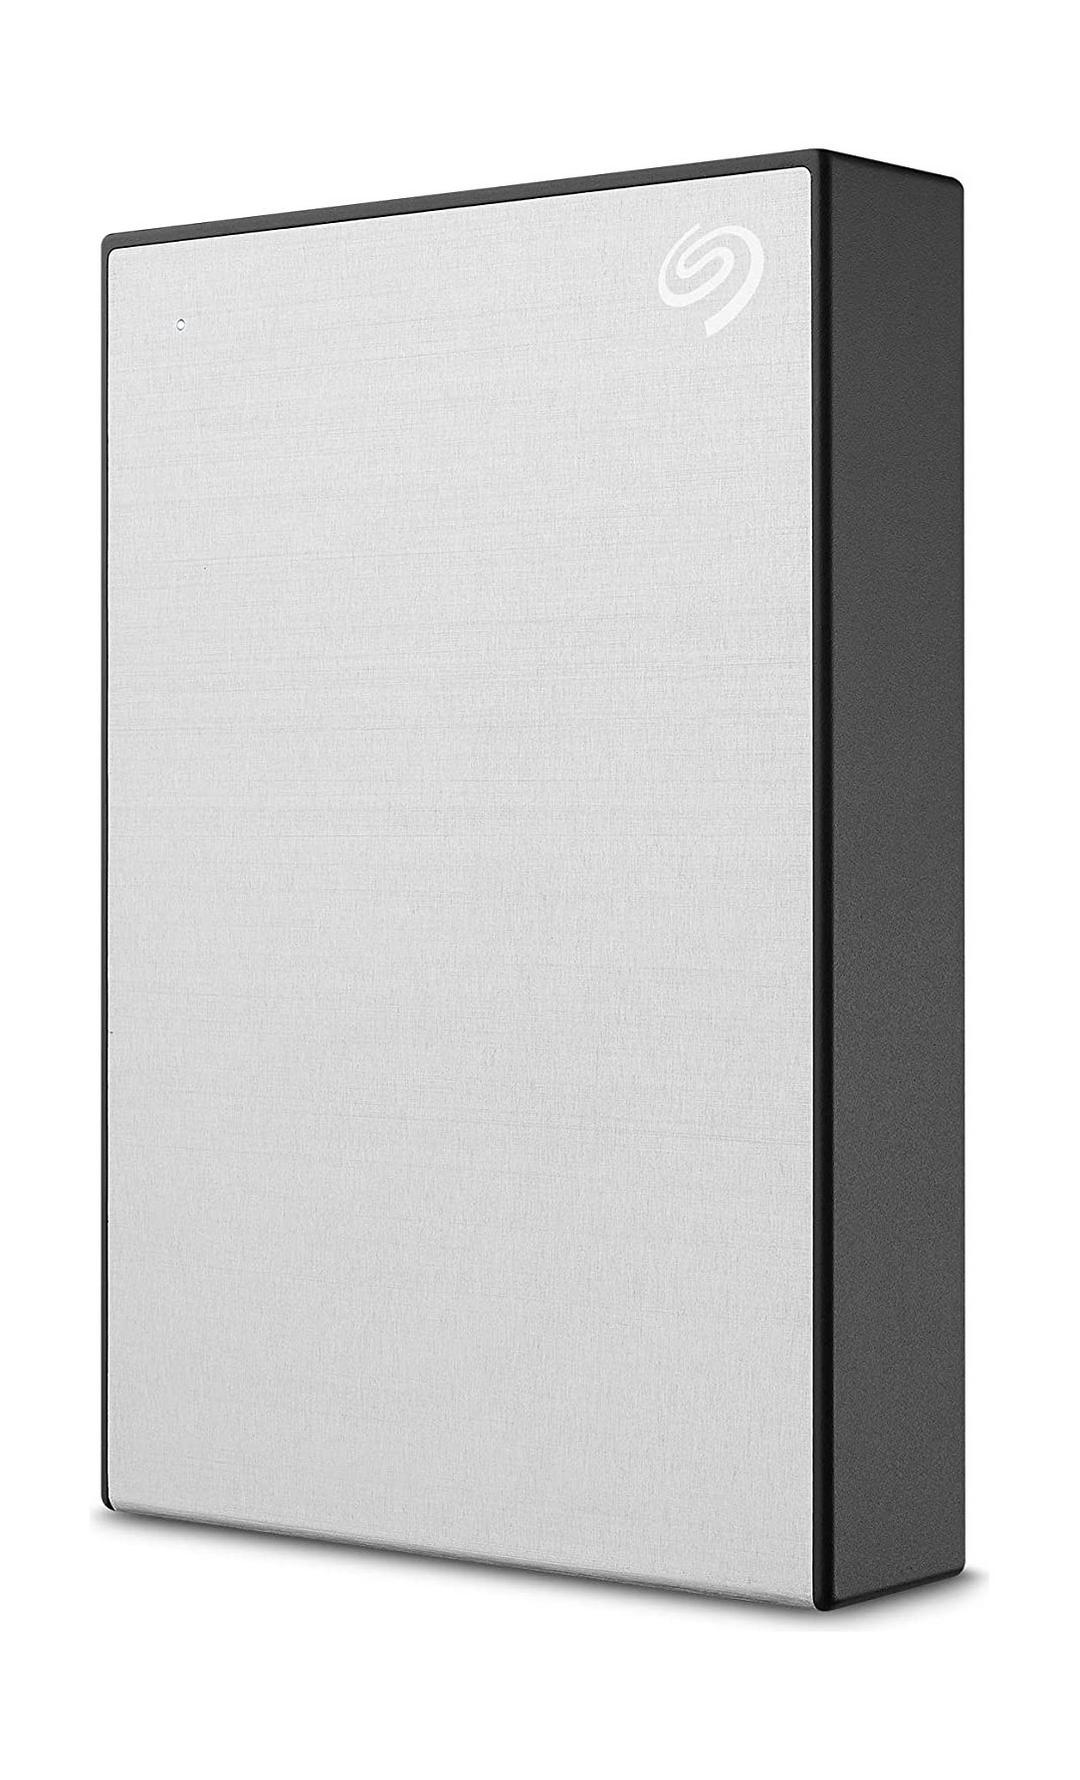 Seagate One Touch 2TB USB 3.2 Gen 1 External Hard Drive - Silver